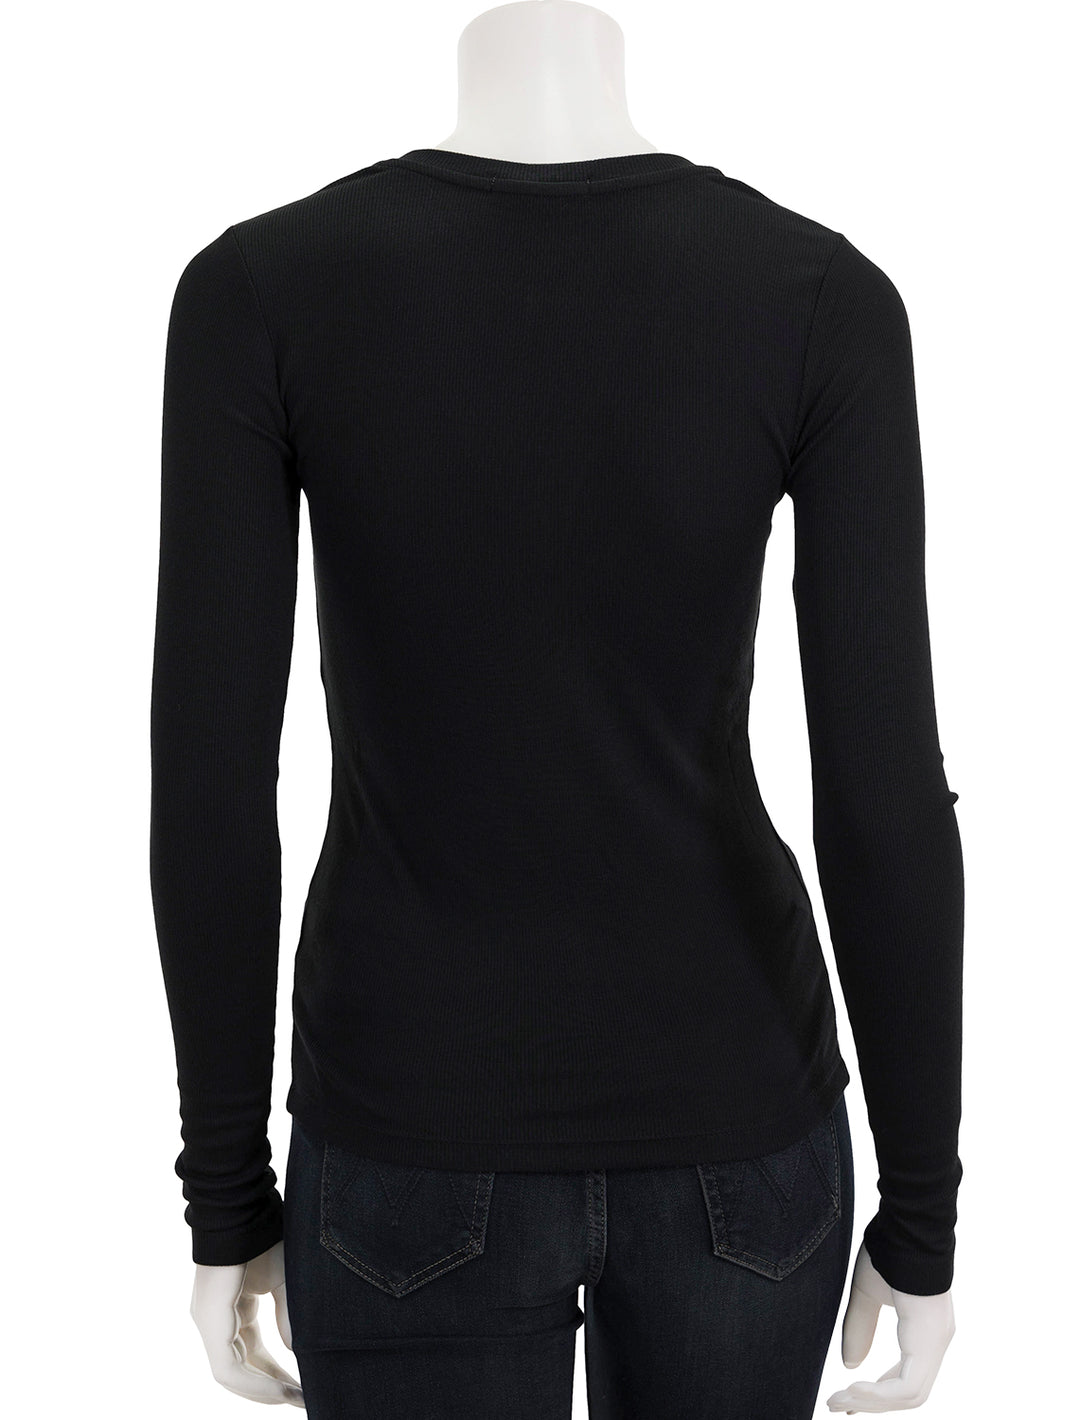 Back view of Marine Layer's lexi rib henley in black.